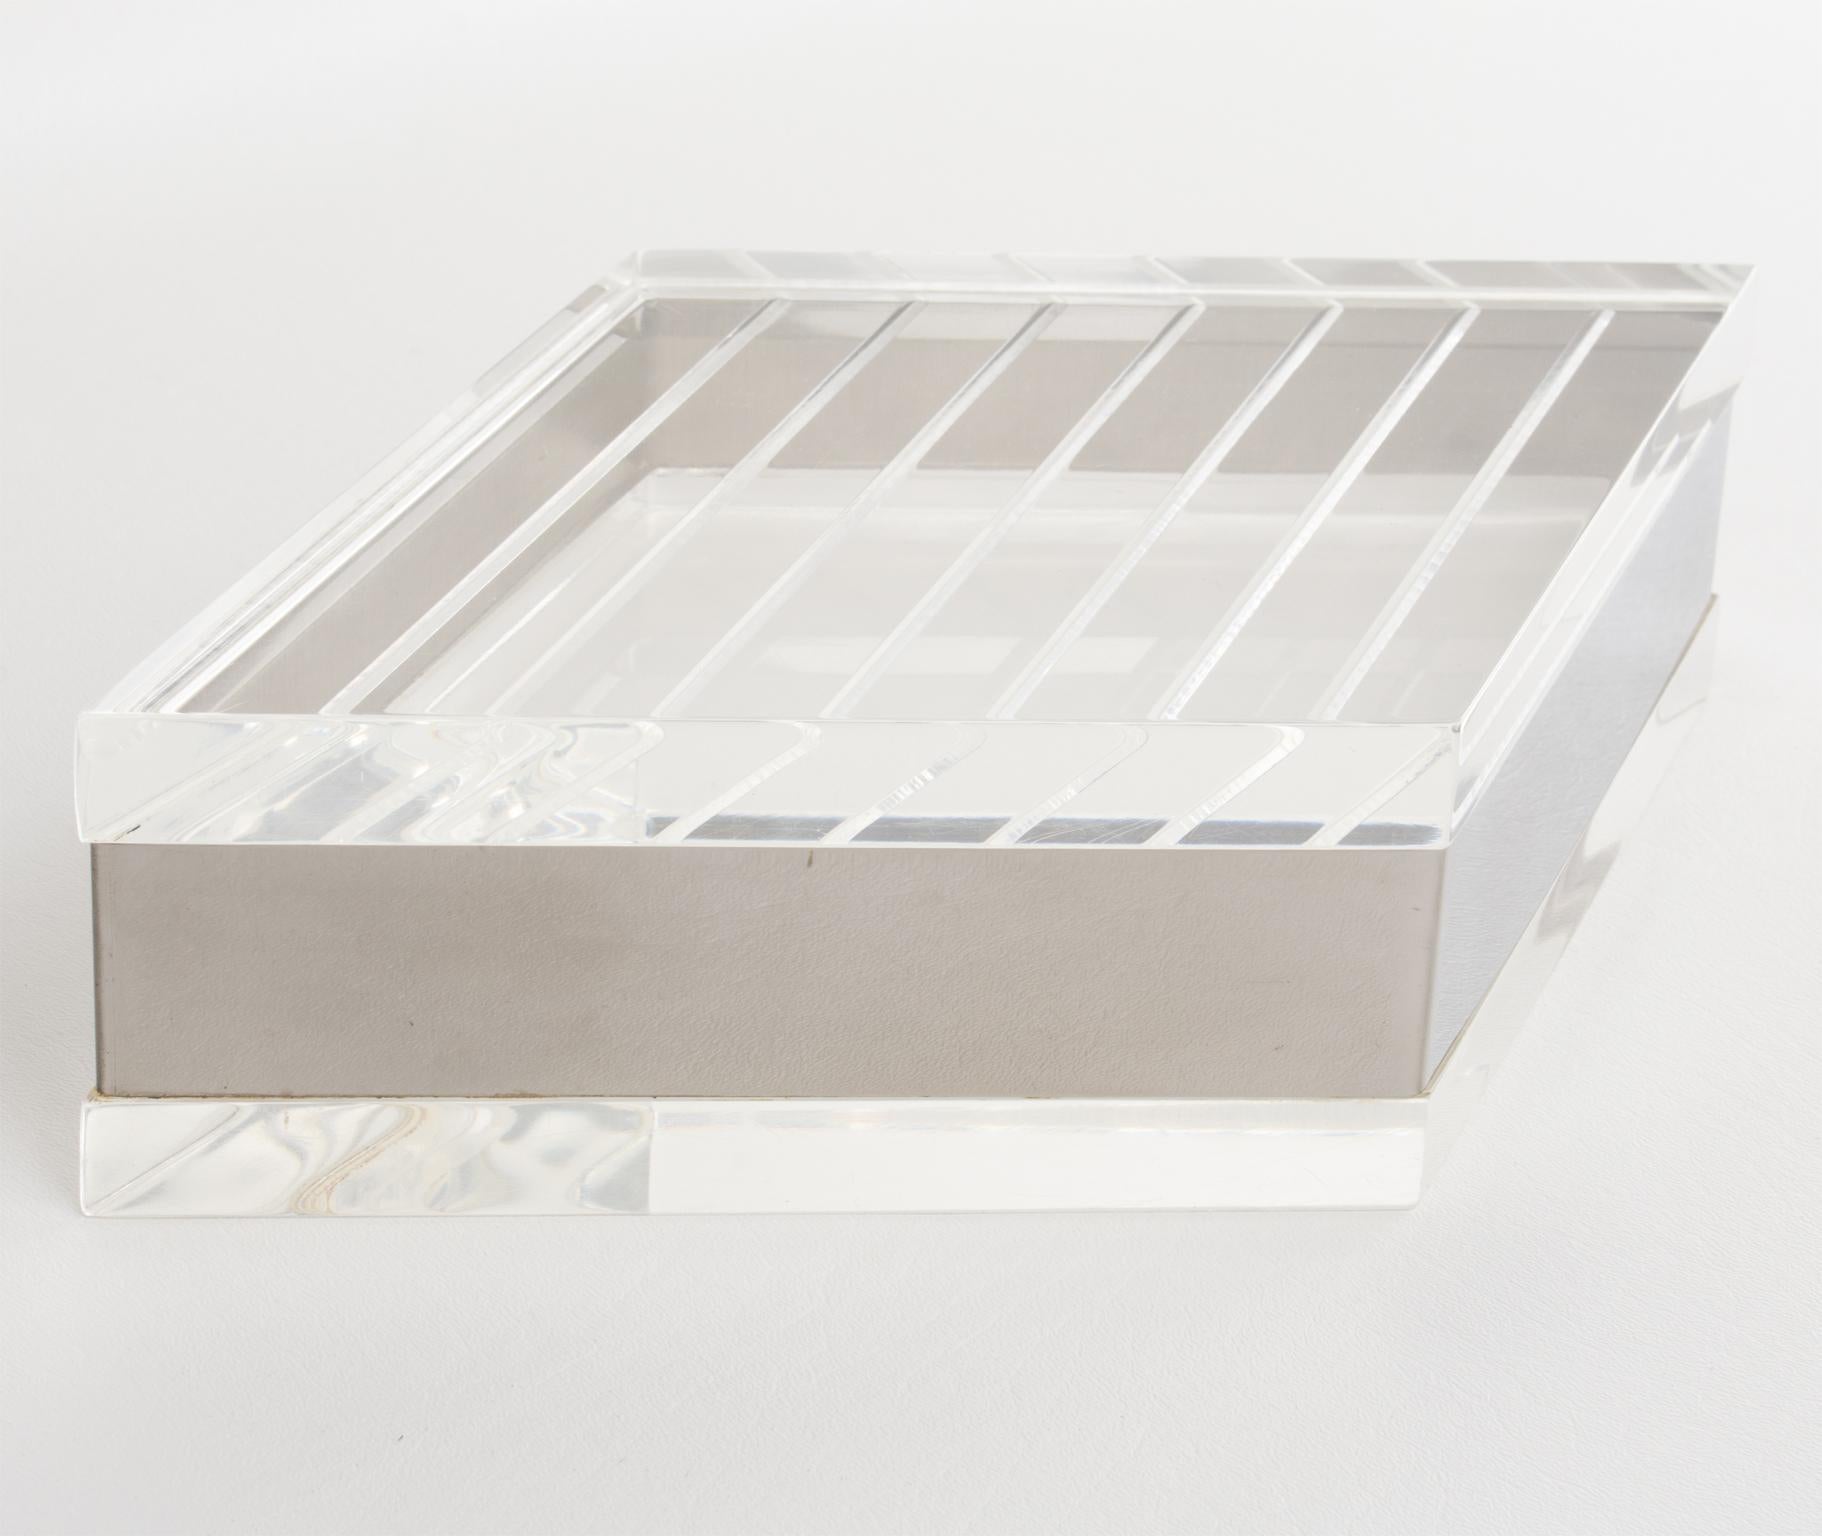 Modernist Geometric Lucite and Chrome Metal Decorative Box, France 1970s For Sale 2